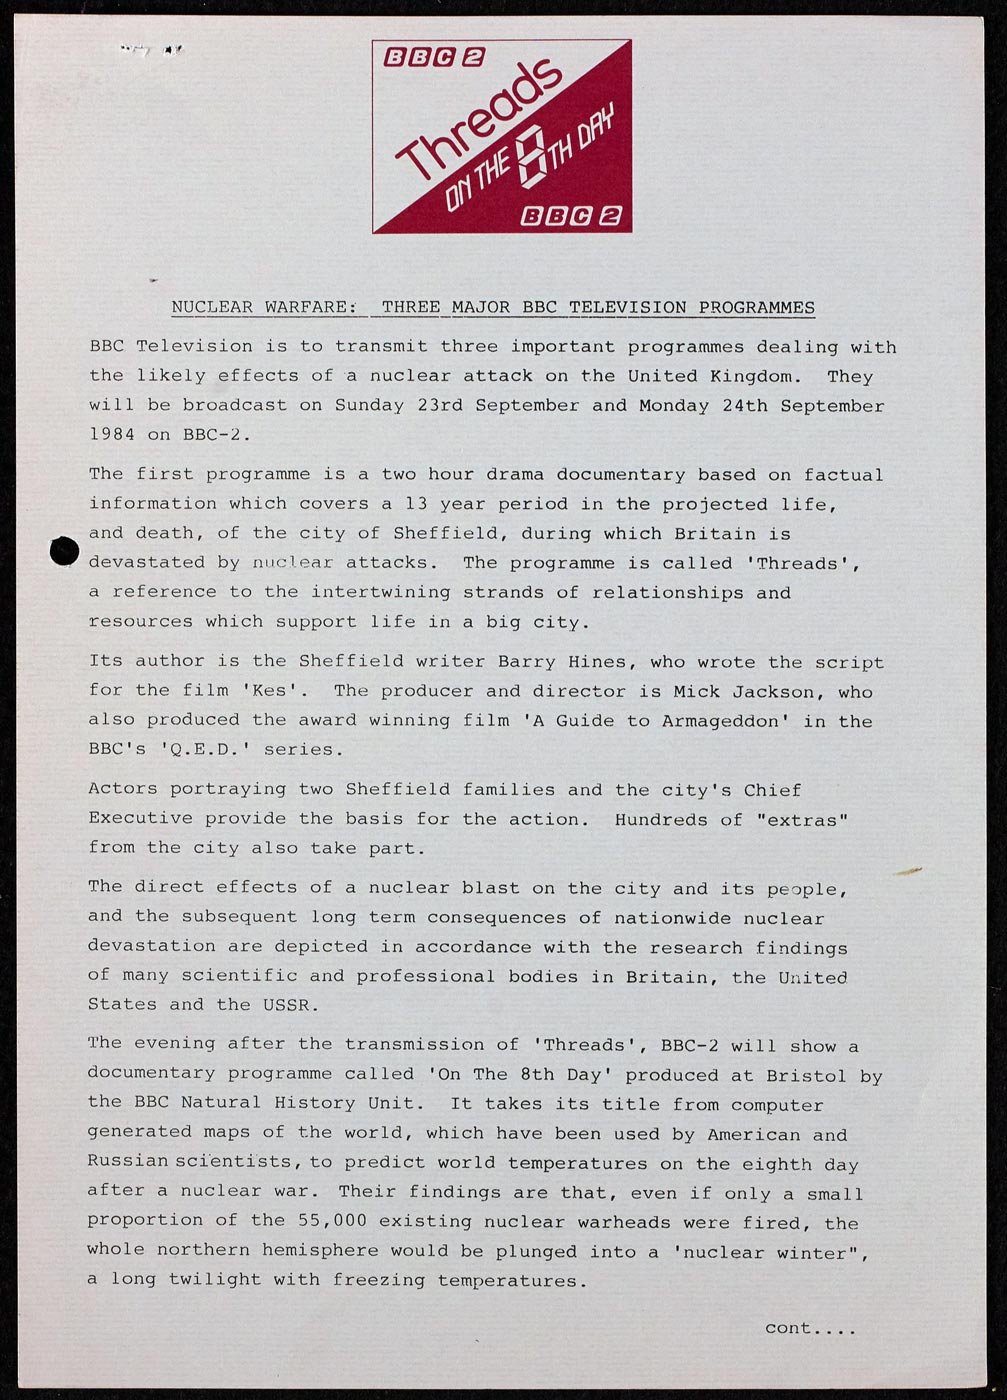 A typed sheet of paper detailing information around the BBC programme Threads on a nuclear attack.